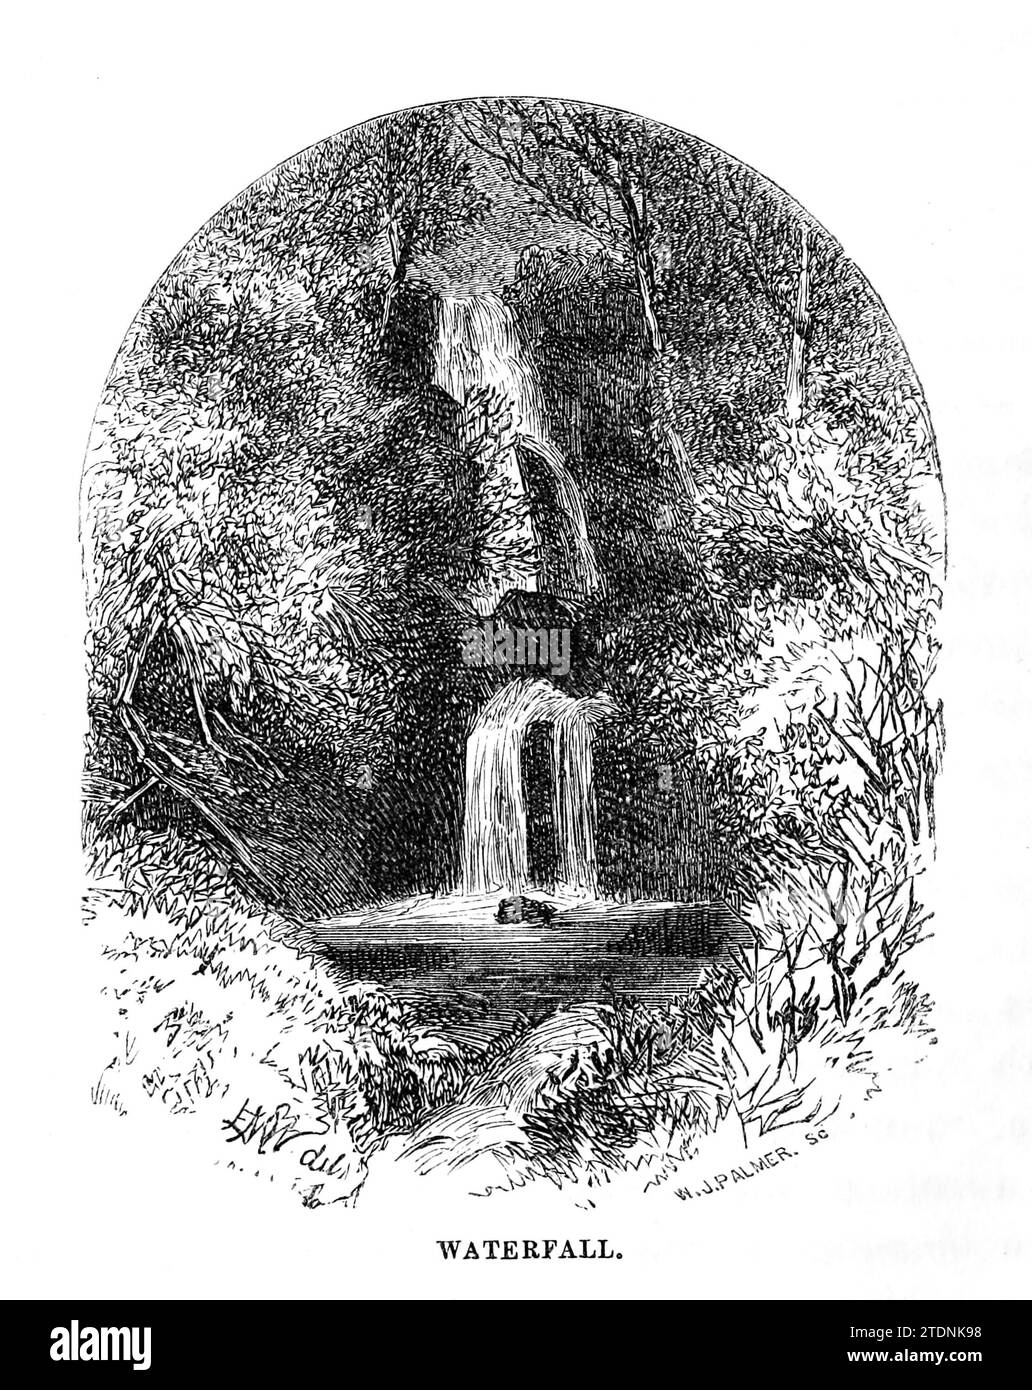 Wasserfall aus dem Buch The Severn Valley: A Series of Sketches, deskriptive and pictorial, of the Course of the Severn: With Notices of its topographische, industrielle und geologische Merkmale; with Views to its Historic and Legendary Associations by Randall, John, 1810-1910 Publication date 1862 Publisher J. S. Virtue Stockfoto